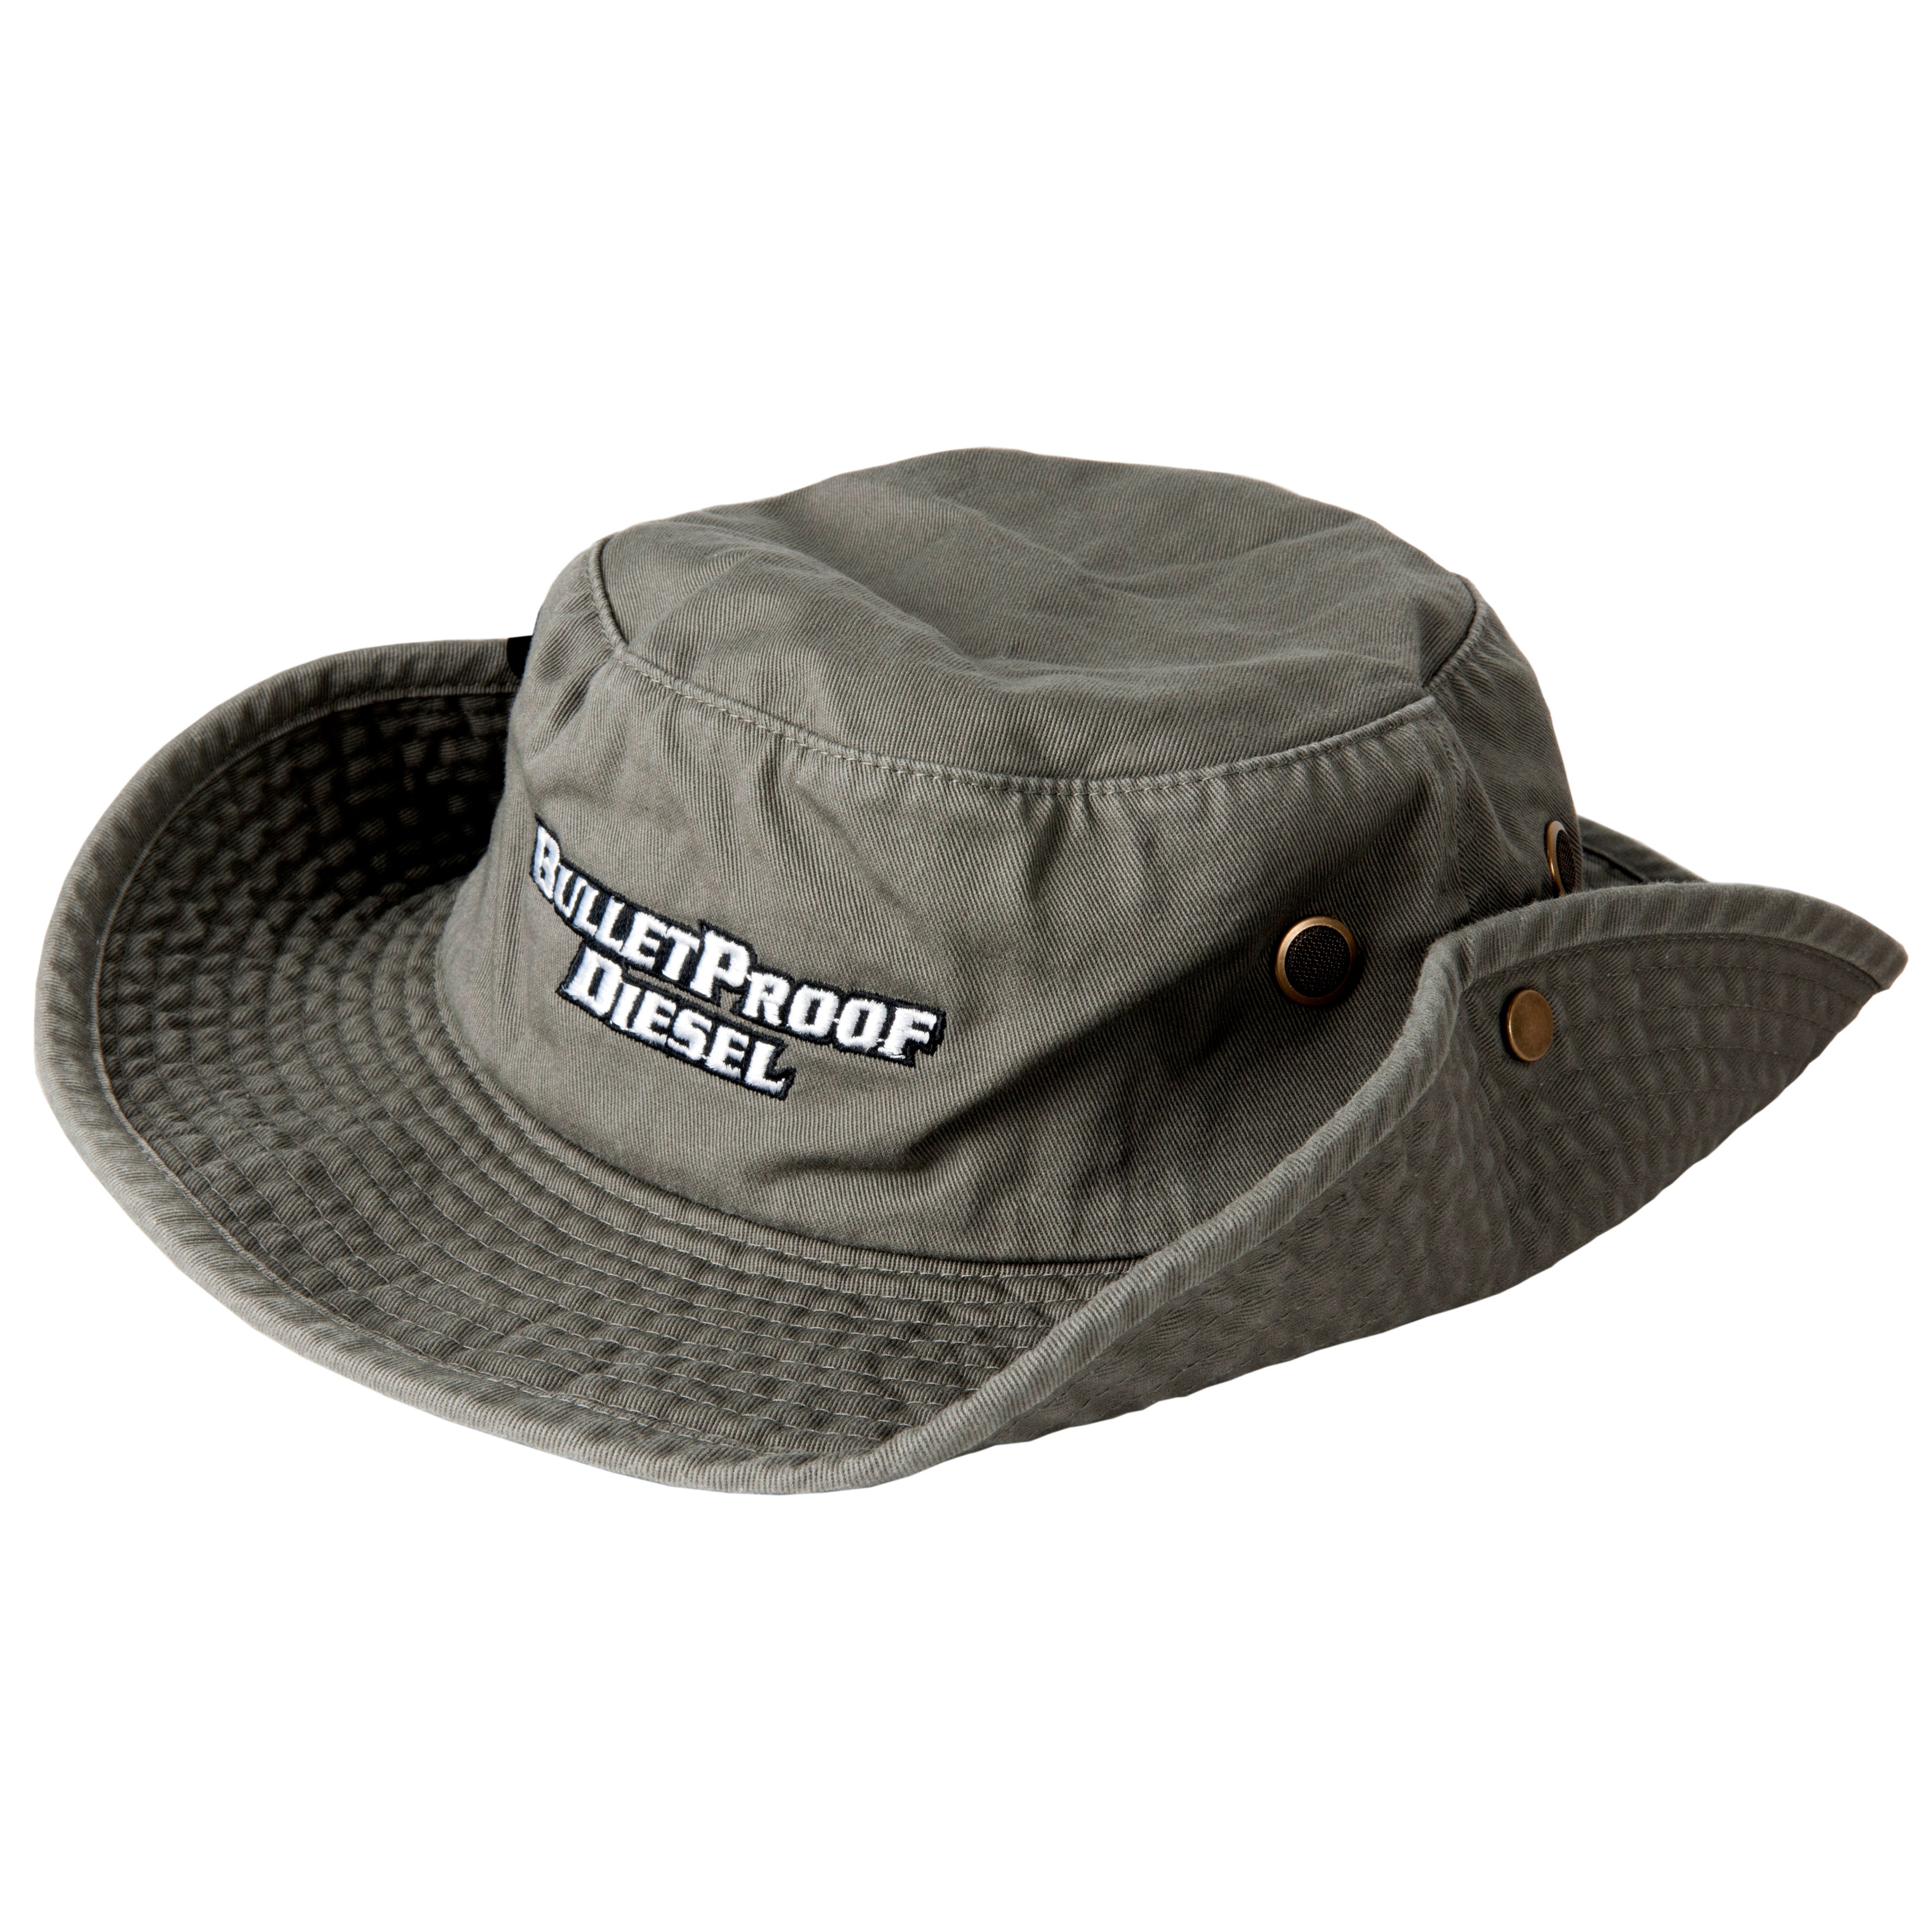 100% Cotton Army Green Boonie Safari Fishing Jungle Bucket Hat with adjustable drawstring cord. 100% Cotton